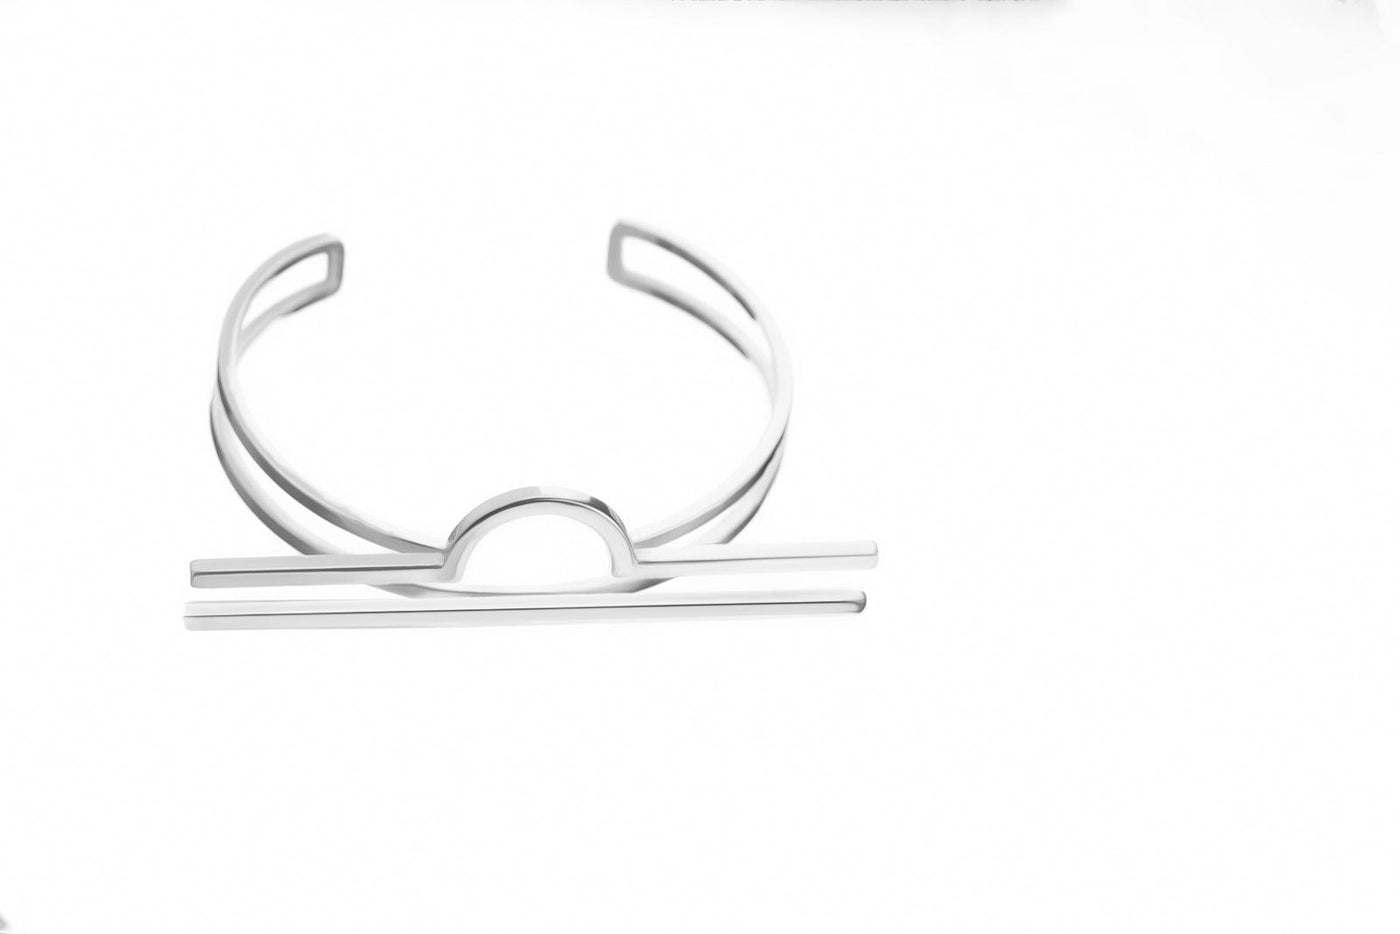 Libra Bracelet - Ethically handmade of Sterling Silver 925. Minimalist unique design by Mystic J, for your original look.